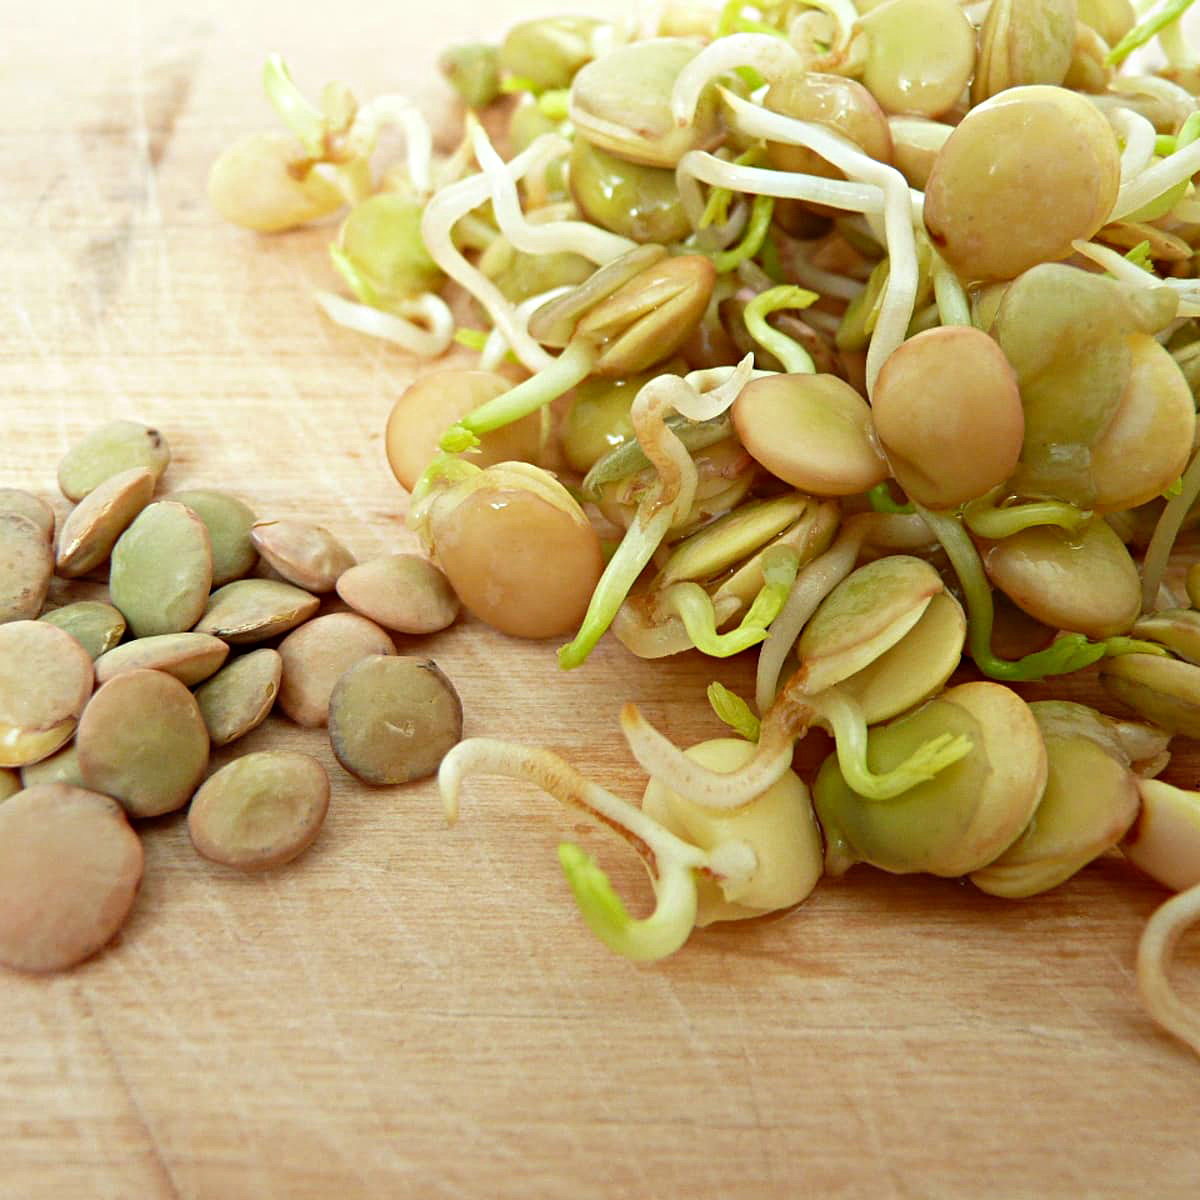 How To Germinate Dried Lentils